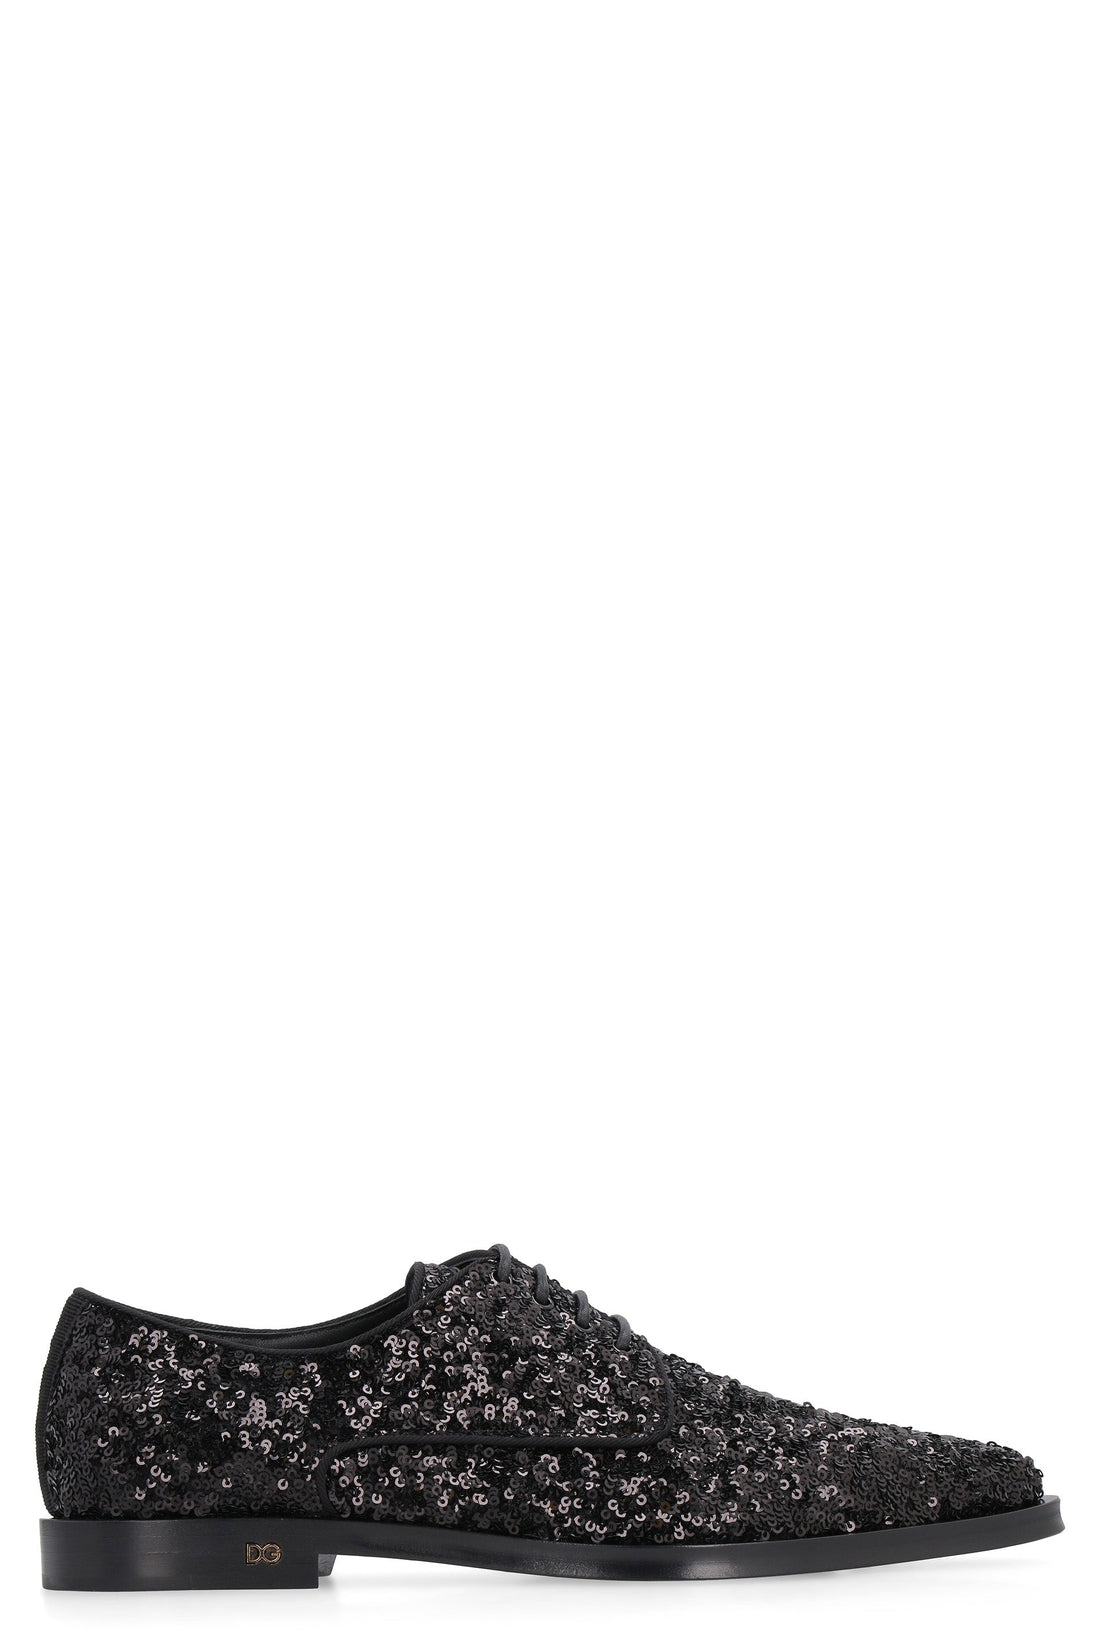 Dolce & Gabbana-OUTLET-SALE-Sequin pointy-toe lace-up shoes-ARCHIVIST